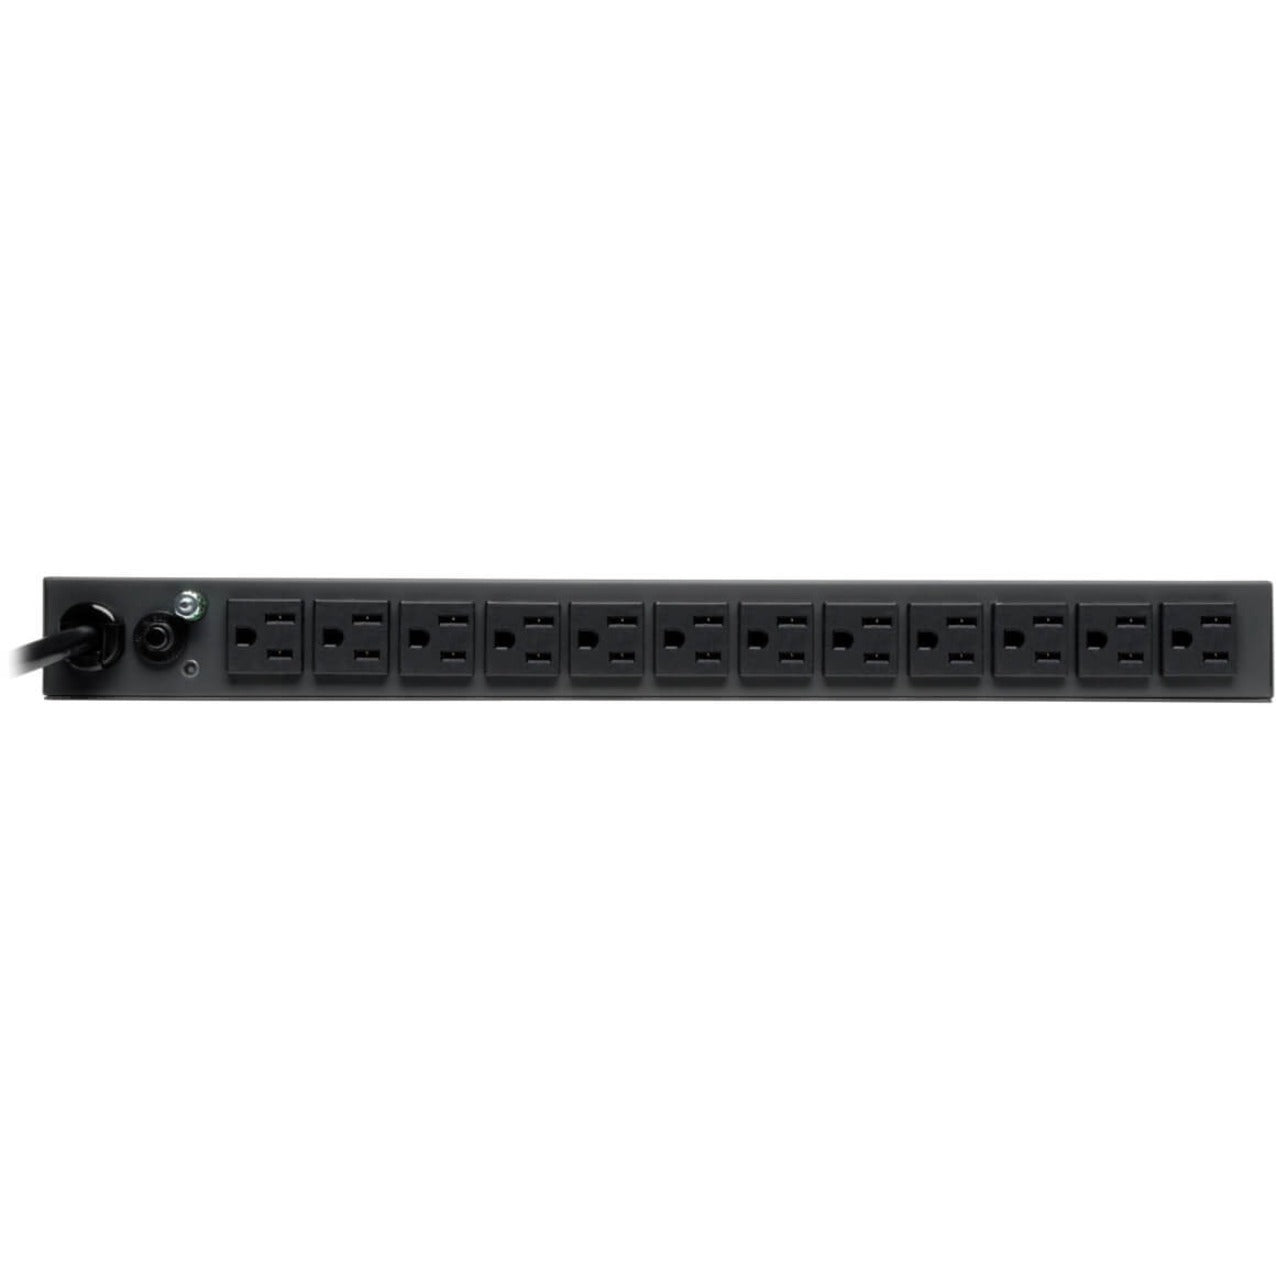 Tripp Lite PDUMH15 PDU Metered 120V 15A 13 Outlet, Unfiltered Electrical Pass-Through for Reliable Power Distribution